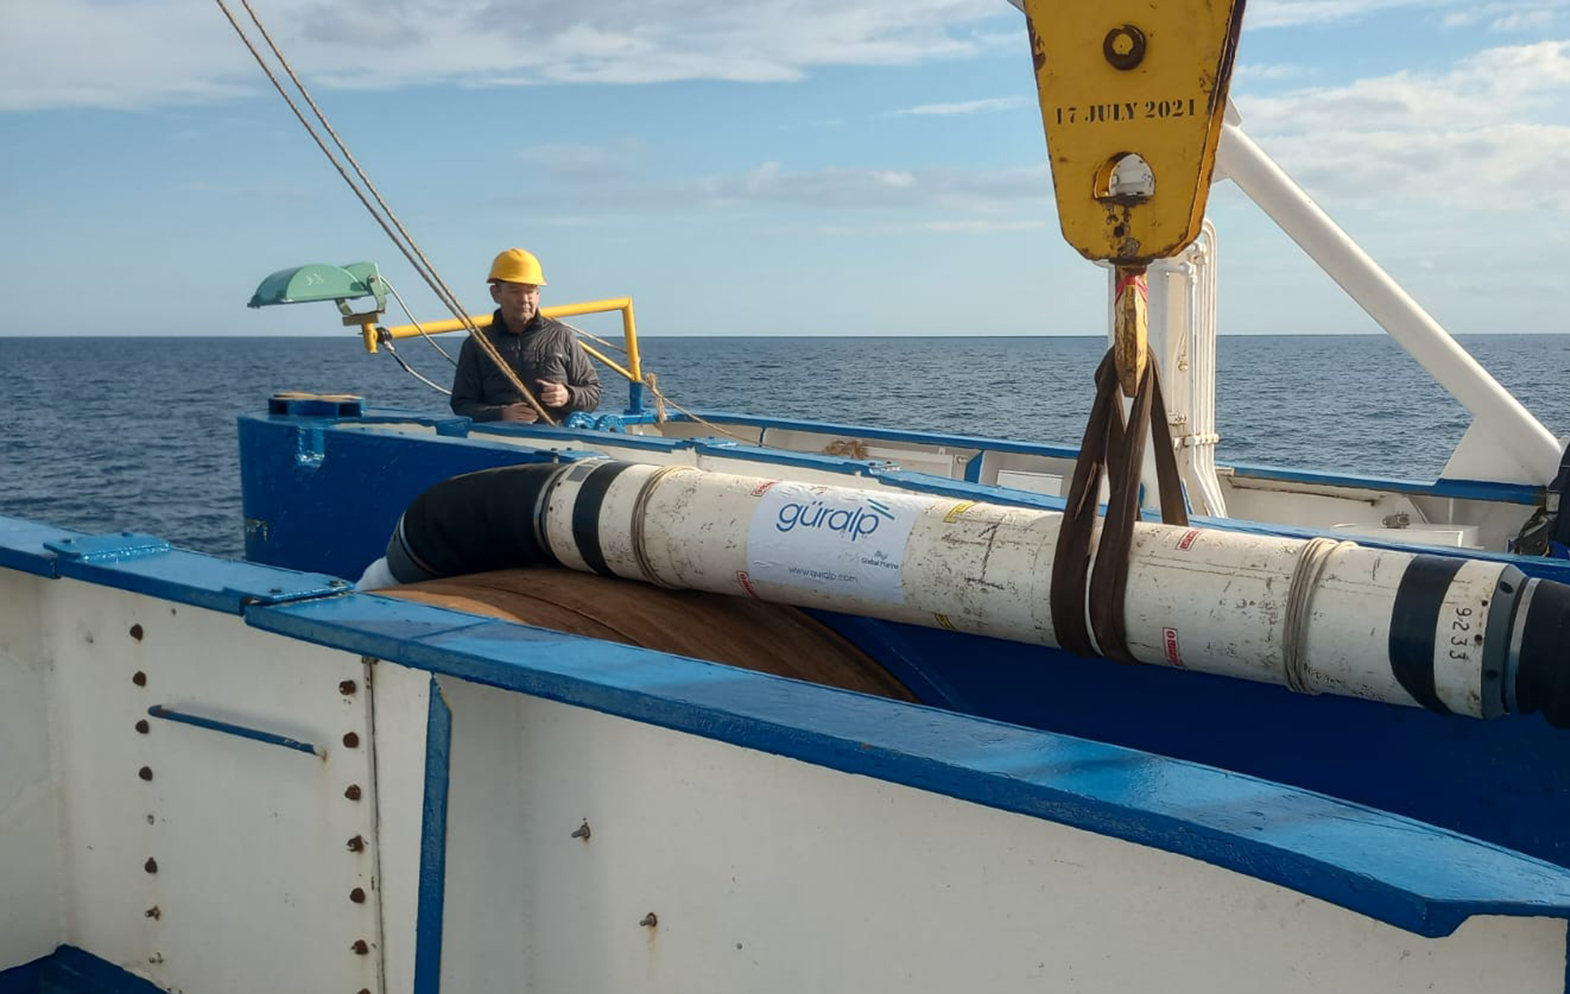 Repeater being deployed as part of the SMART cable INSEA wet demonstrator project, off-coast Catania, Sicily, Italy 